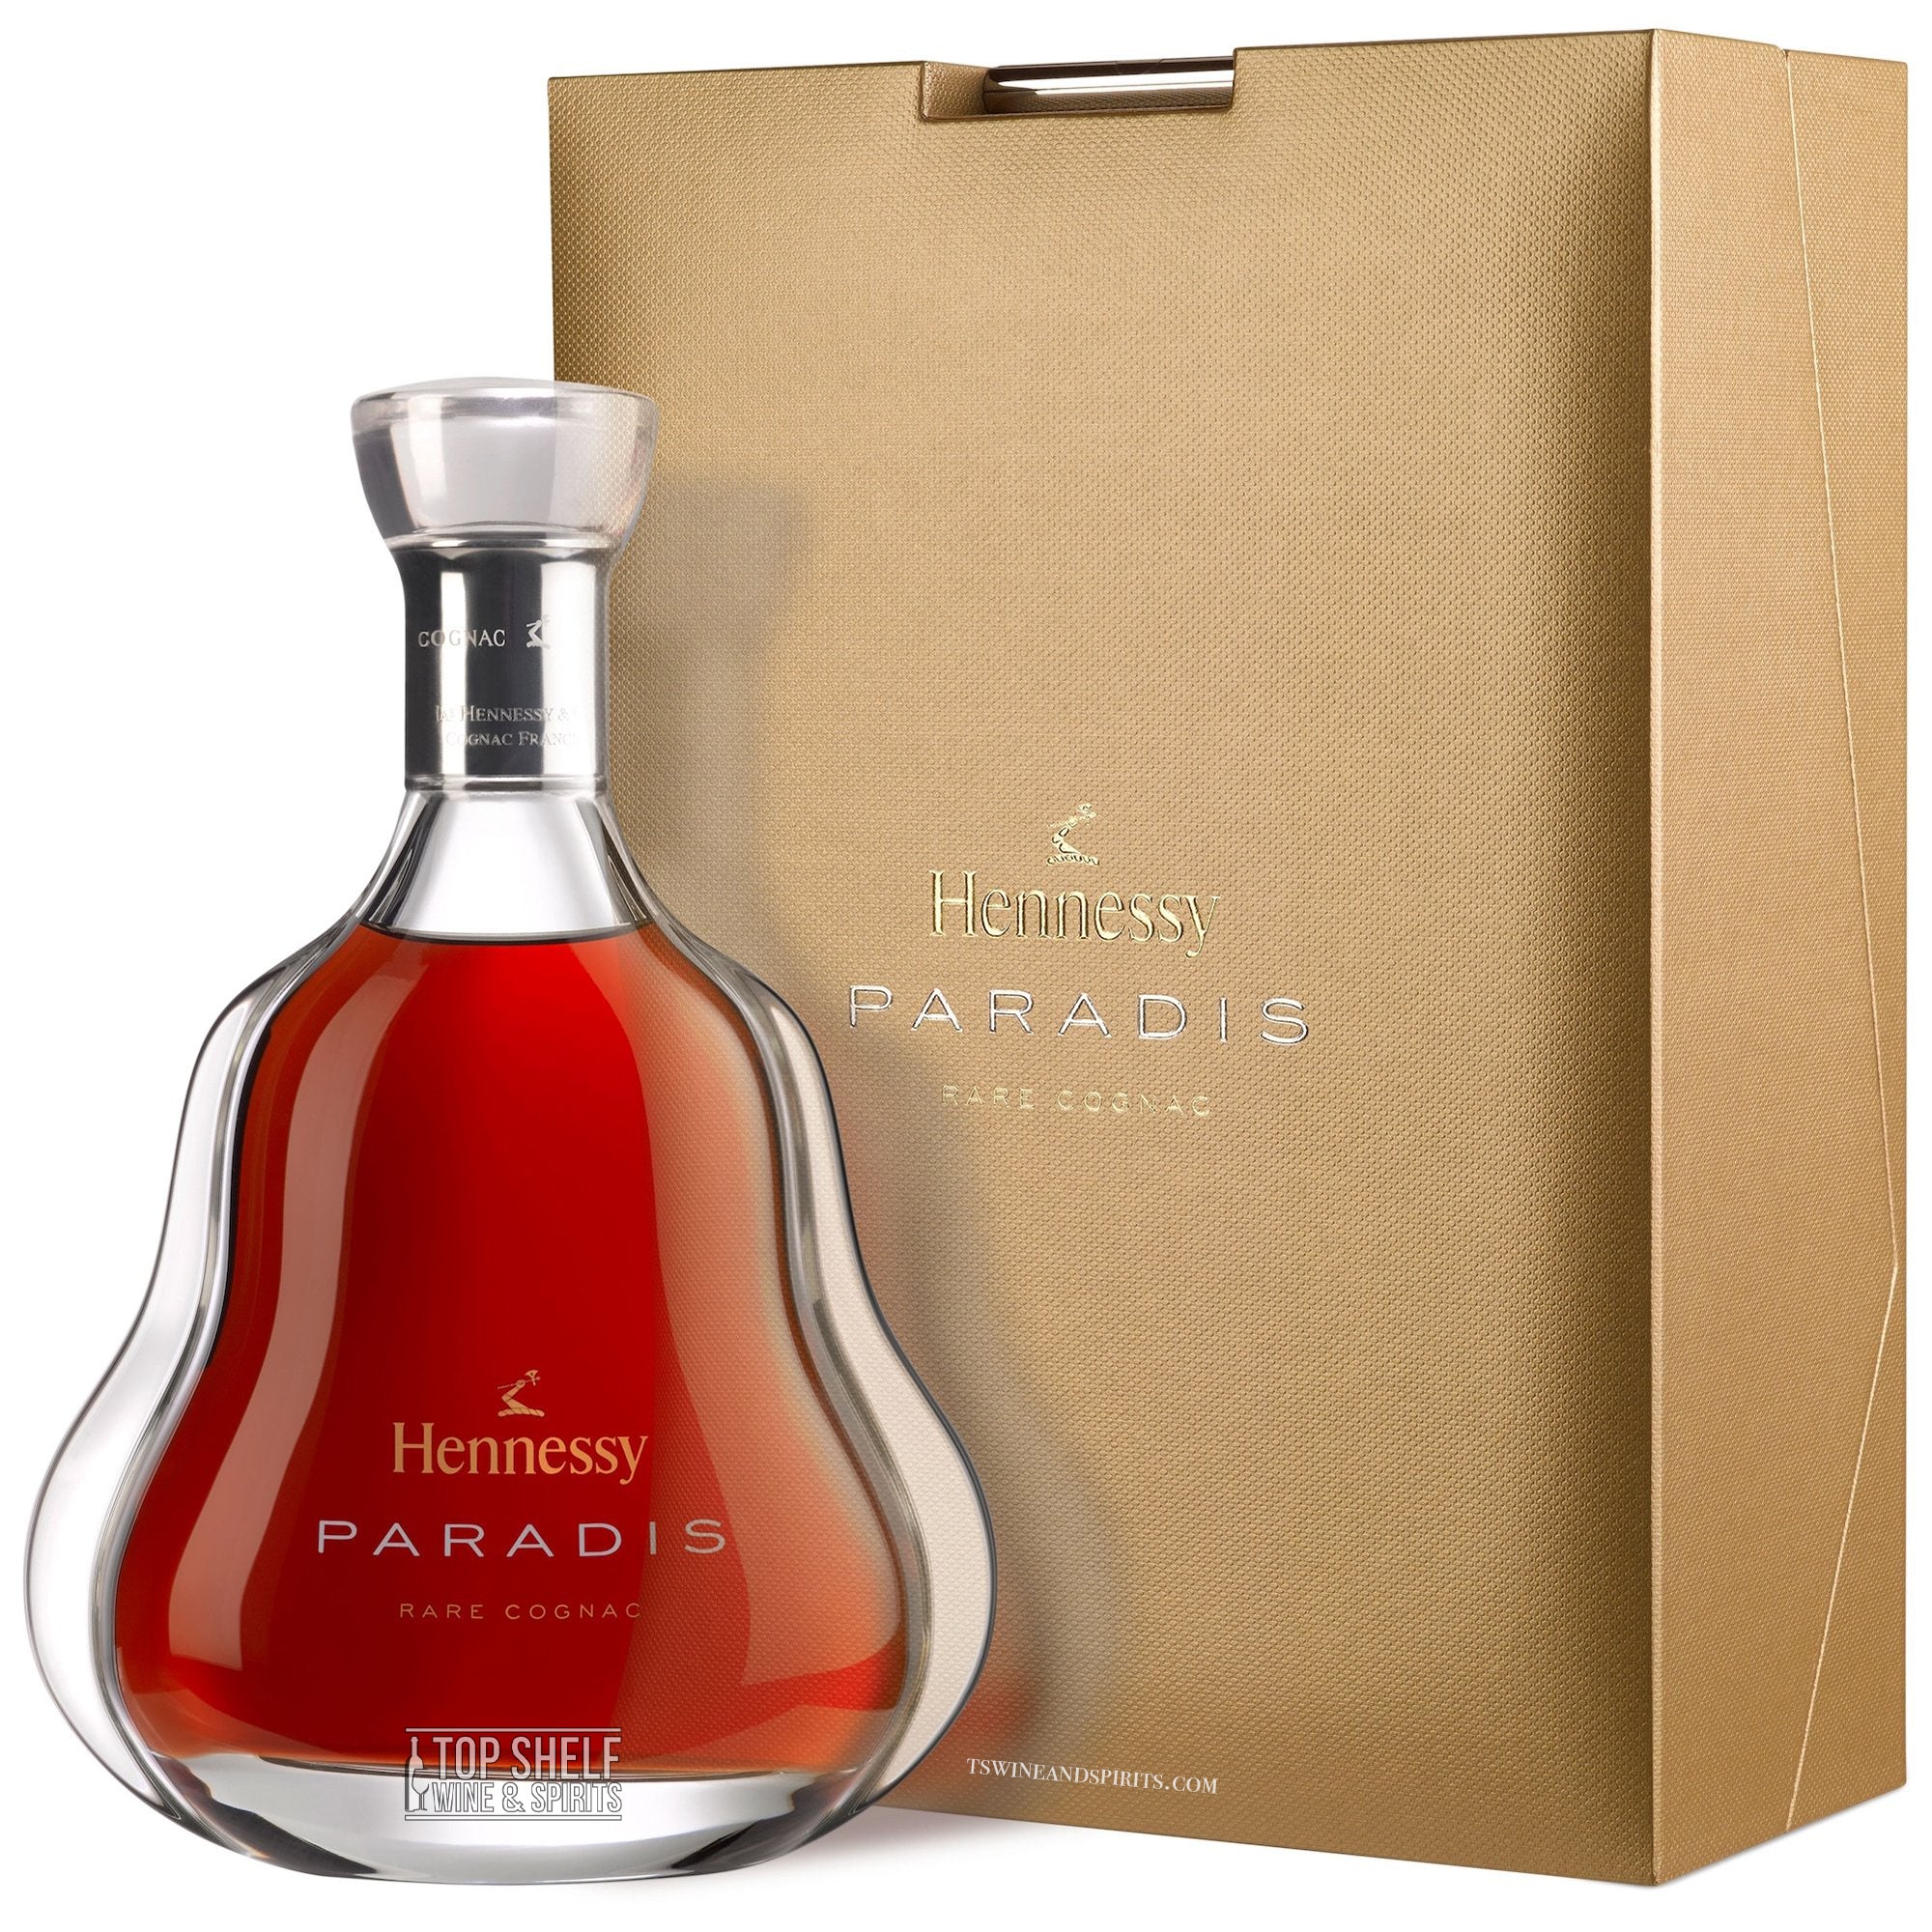 Hennessy Paradis Rare Cognac | Delivery & Gifting Available